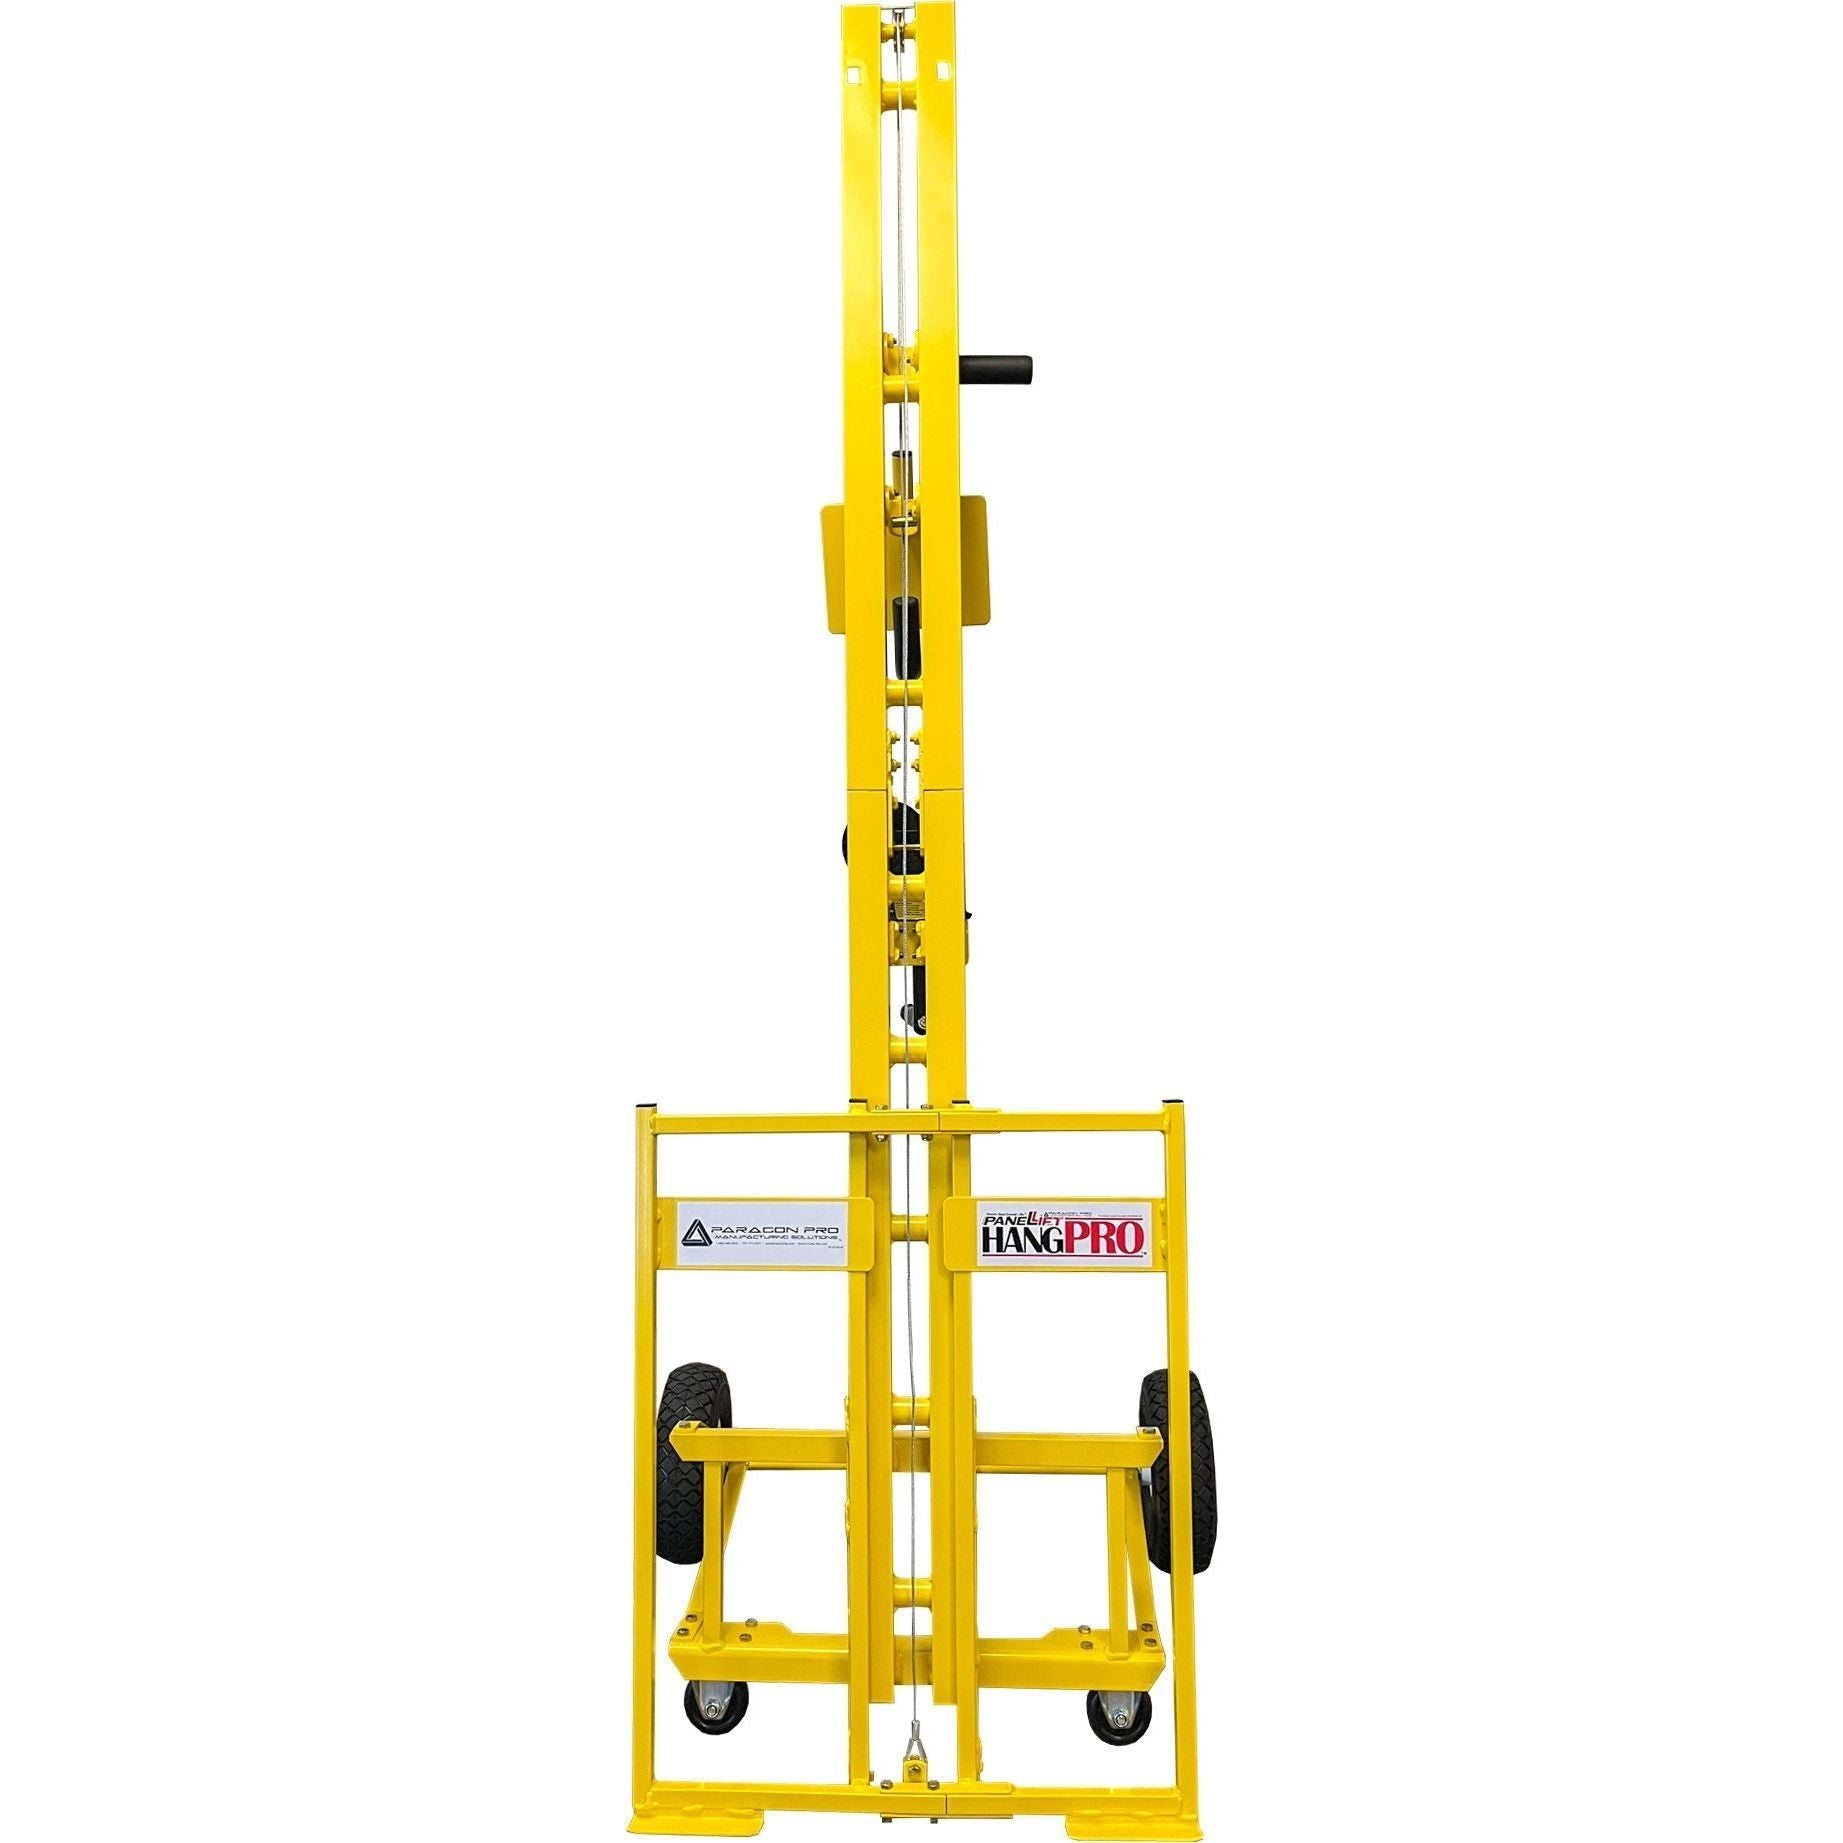 Panellift® Hangpro Drywall Lift for Walls Model 100 - Paragon Pro Manufacturing Solutions Inc.